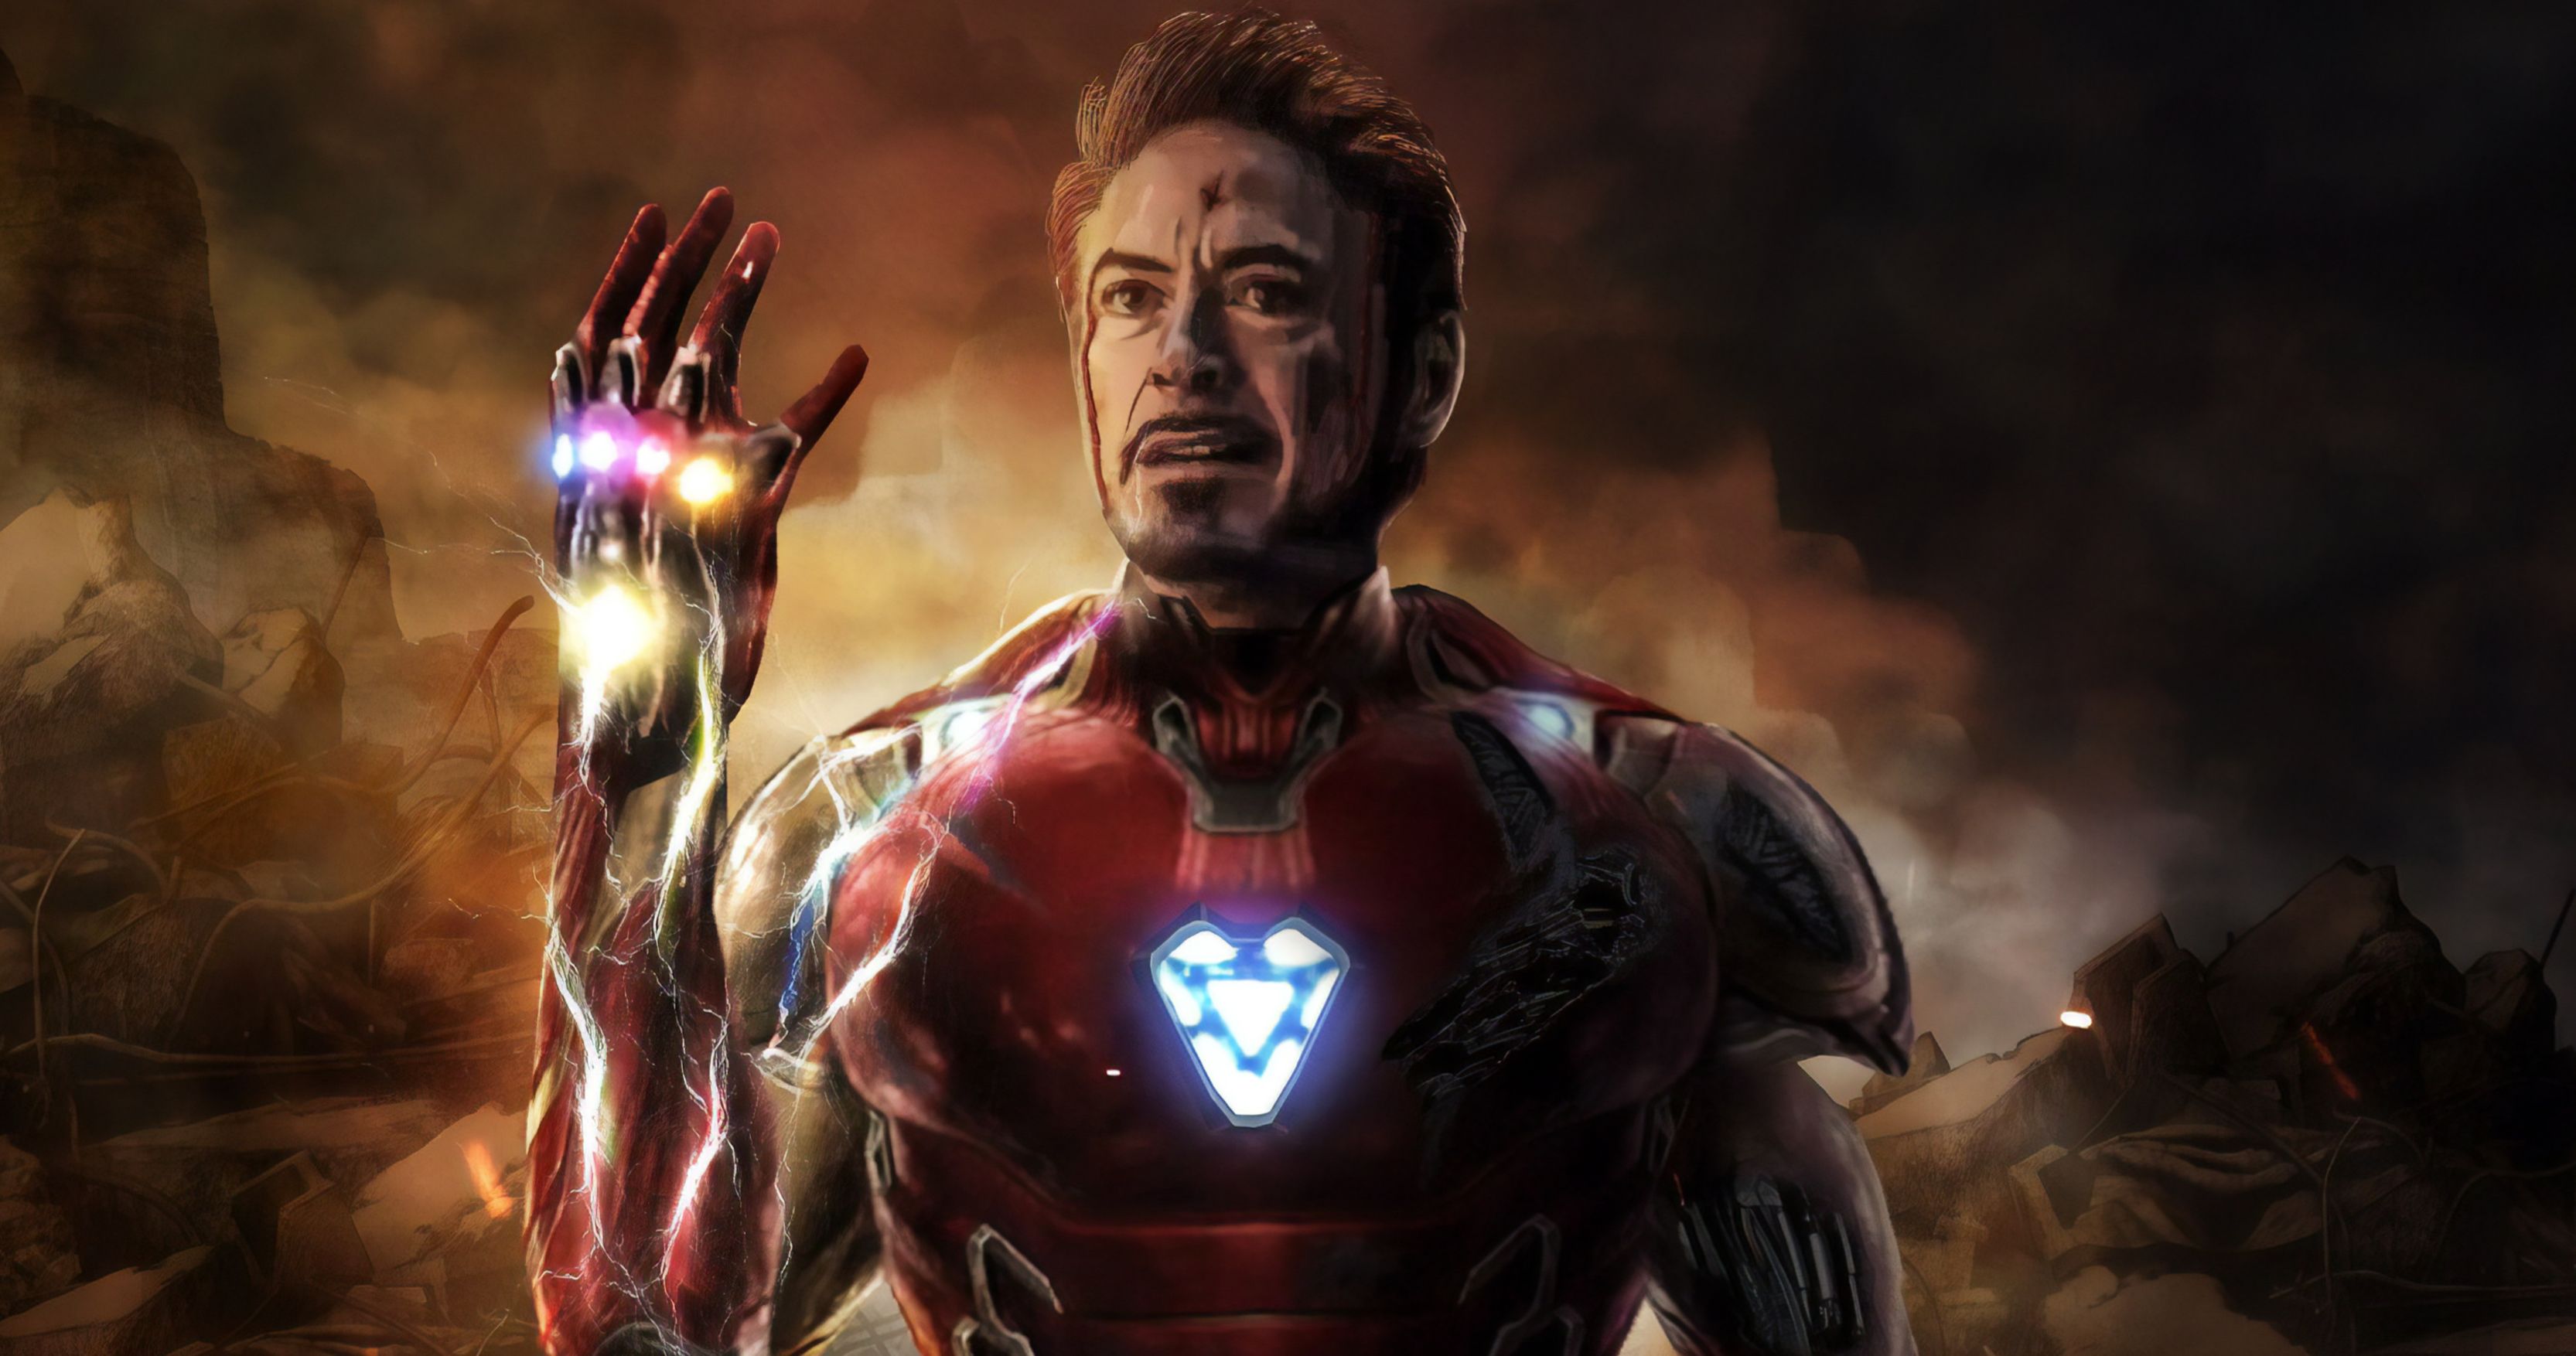 Marvel Fans Petition to Bring RDJ's Iron Man Back to the MCU